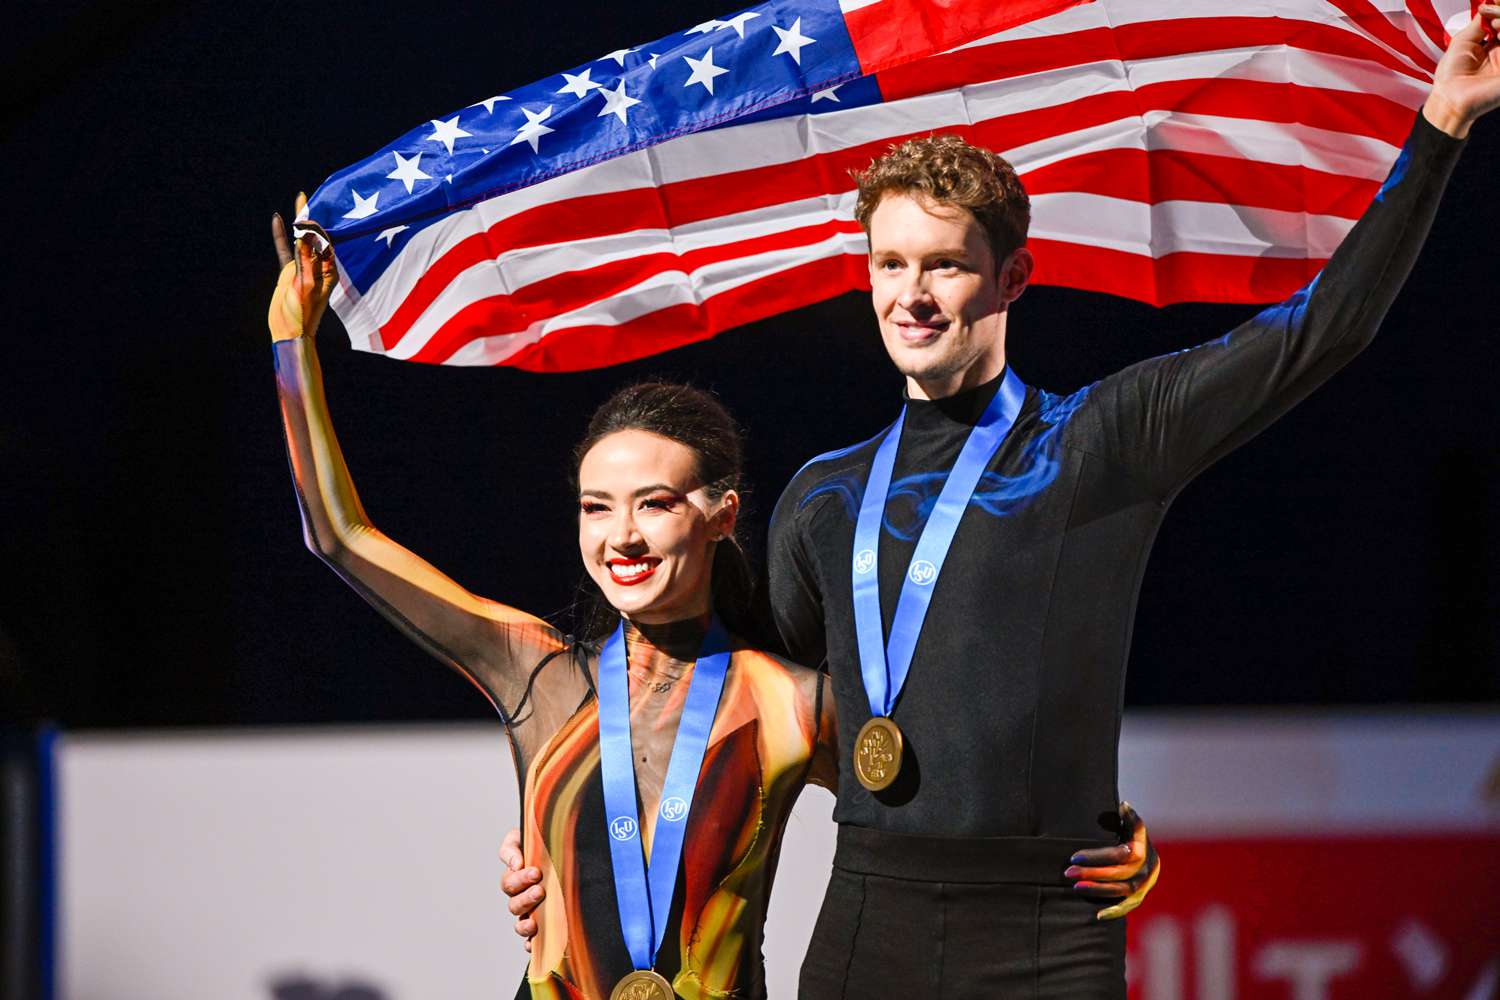 Madison Chock and Evan Bates of the United States reacts in the Ice Dance medal ceremony during the ISU World Figure Skating Championships 2023 at Saitama Super Arena on March 25, 2023 in Saitama, Japan